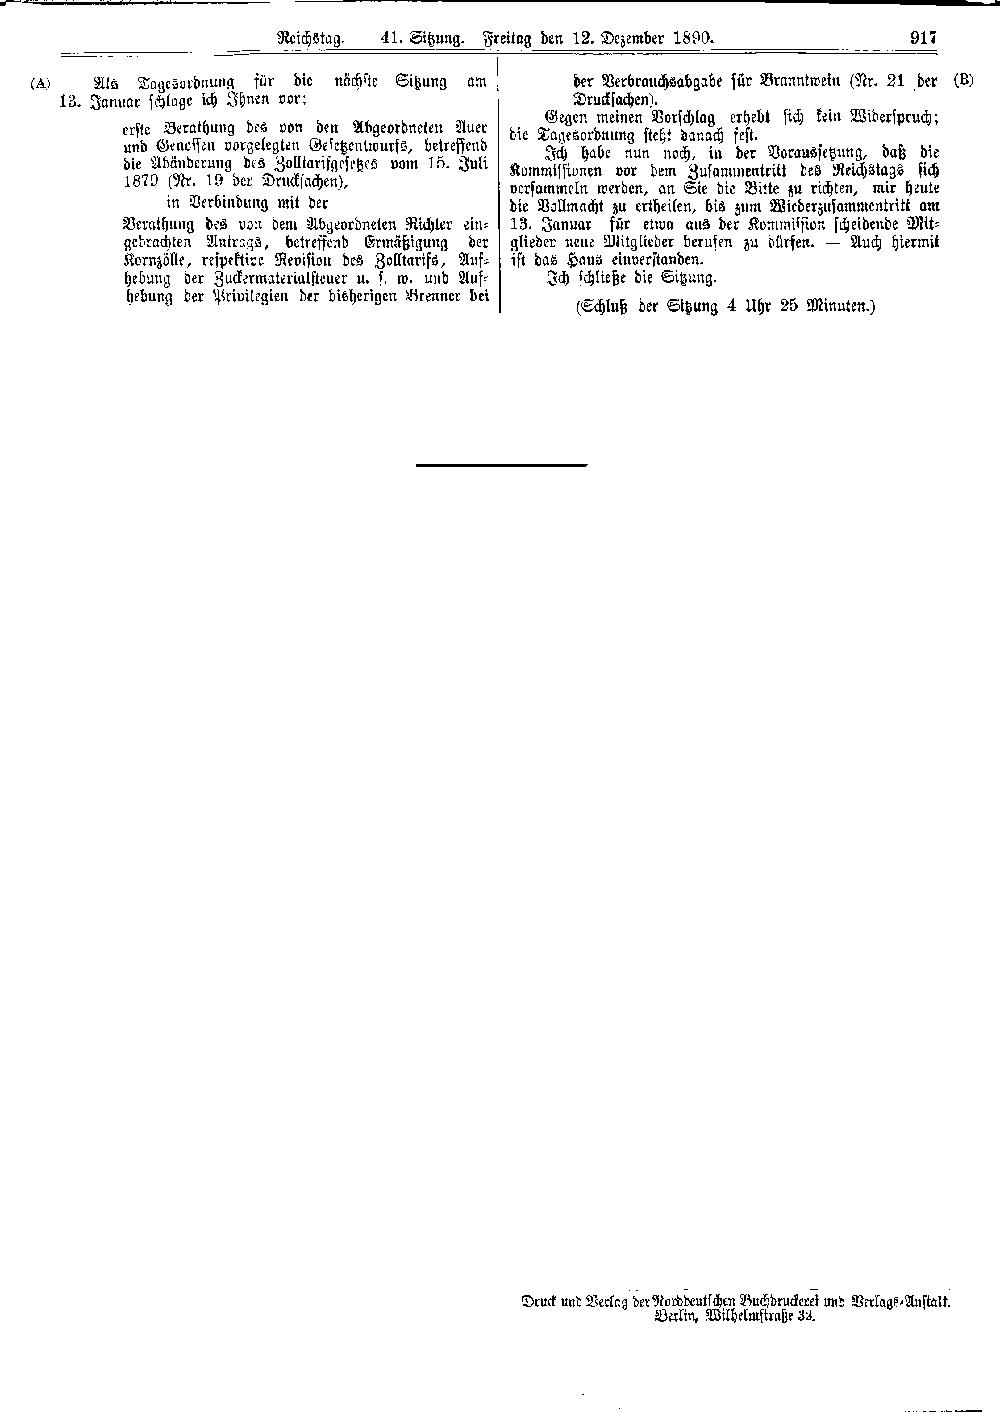 Scan of page 917